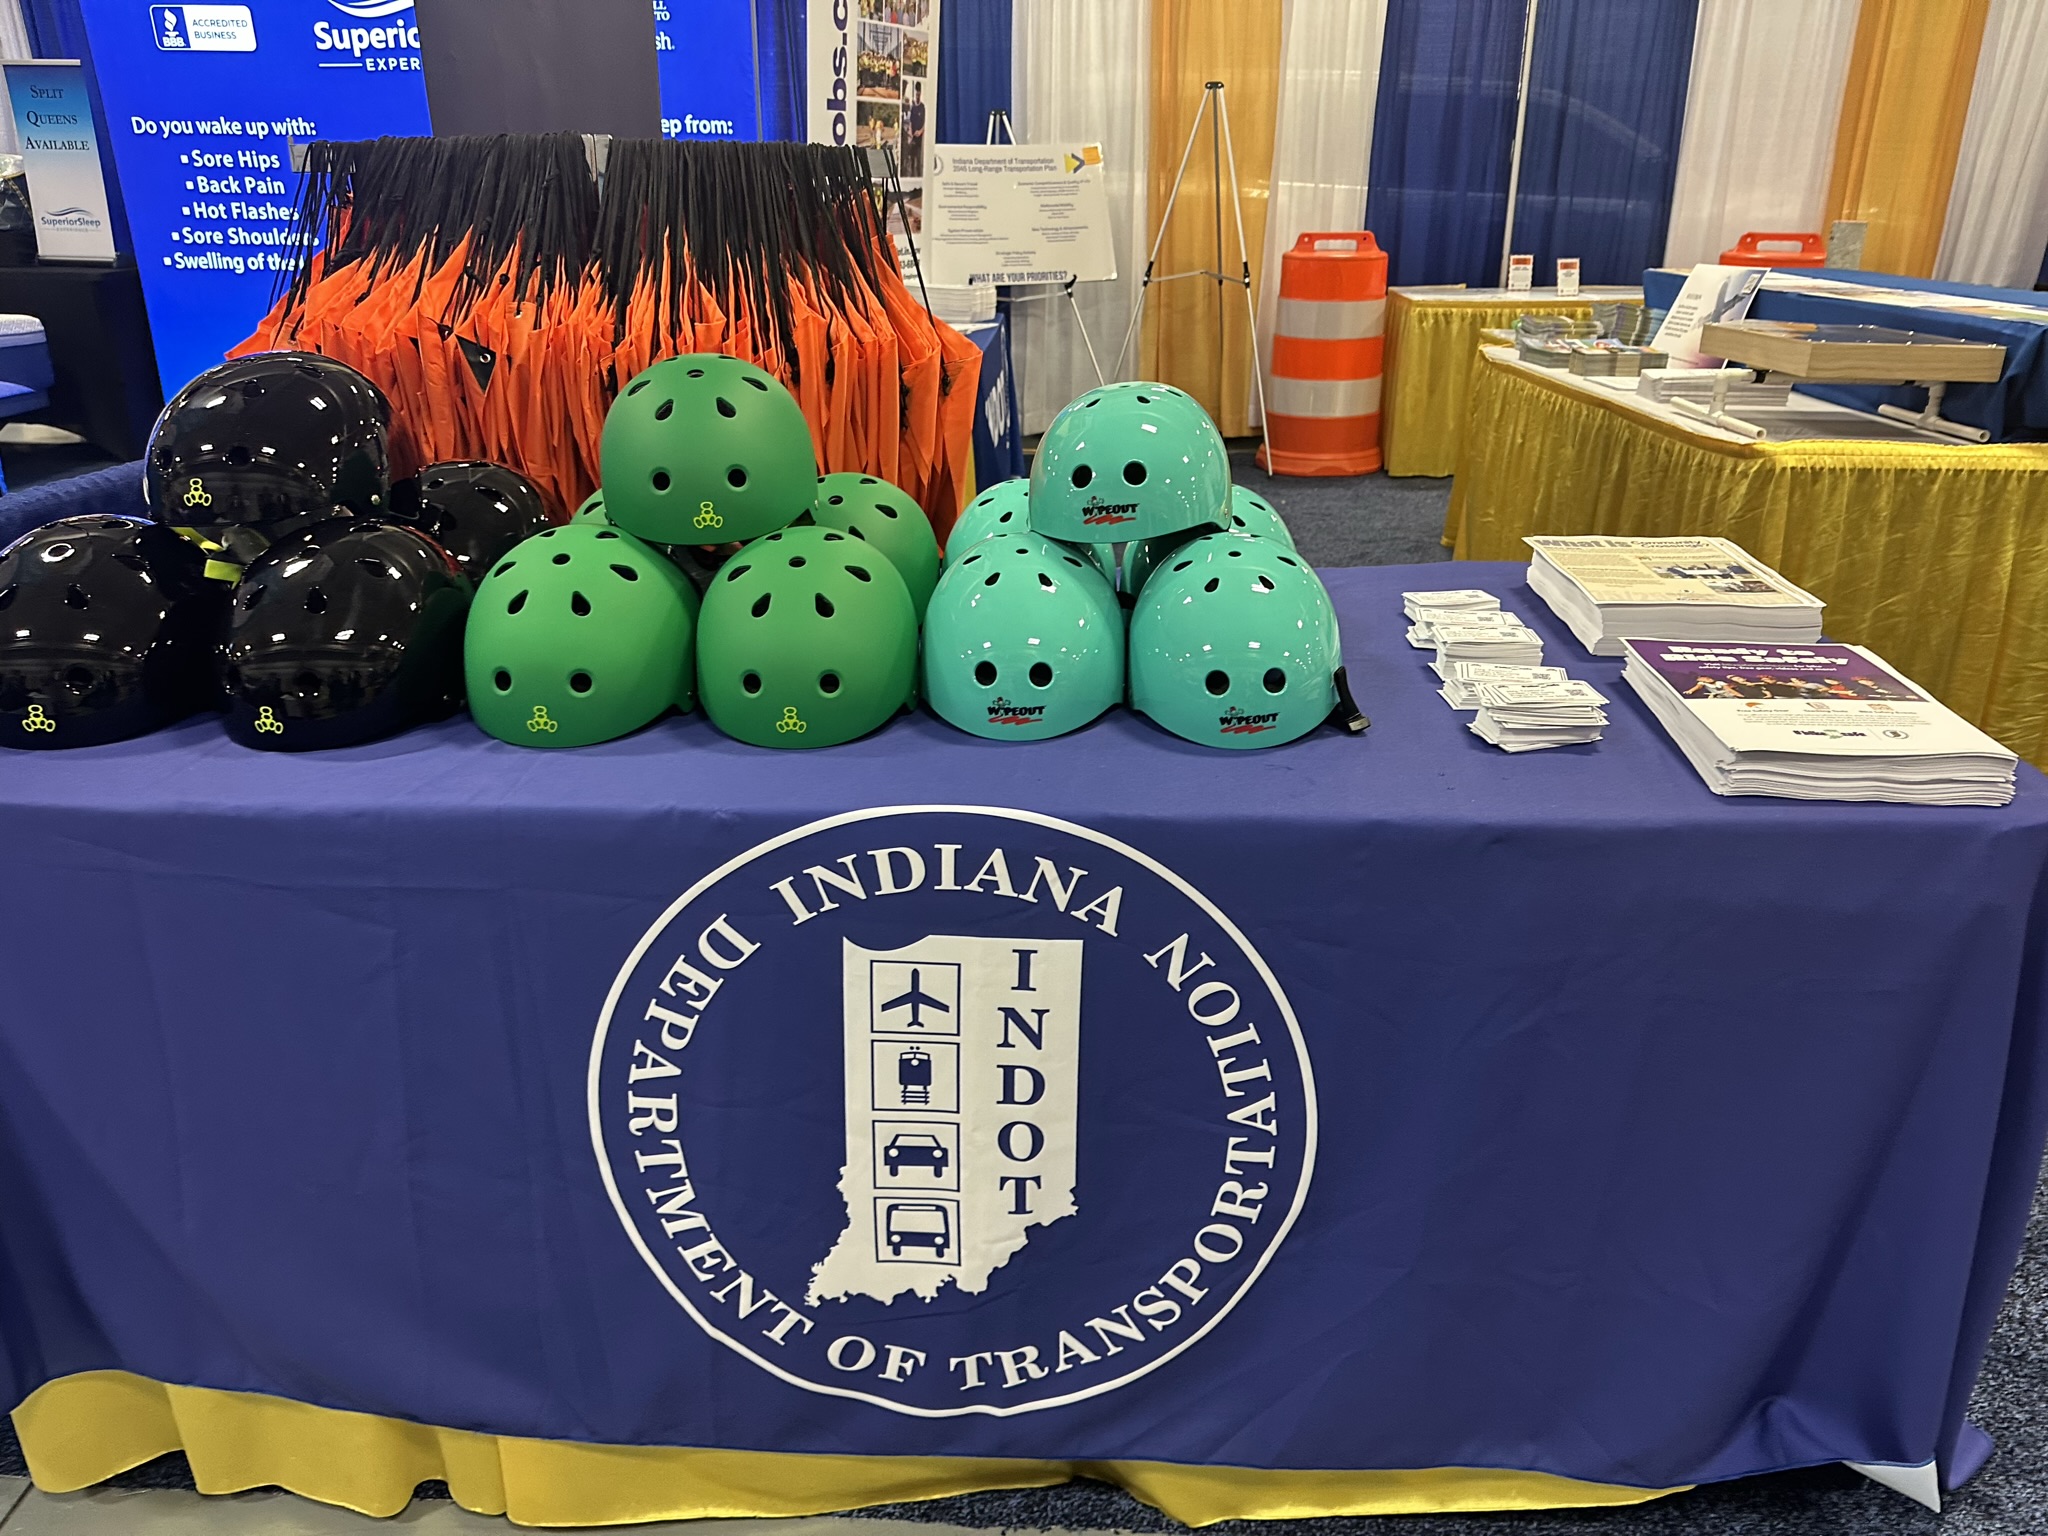 Bike helmets on a table in INDOT's indoor booth